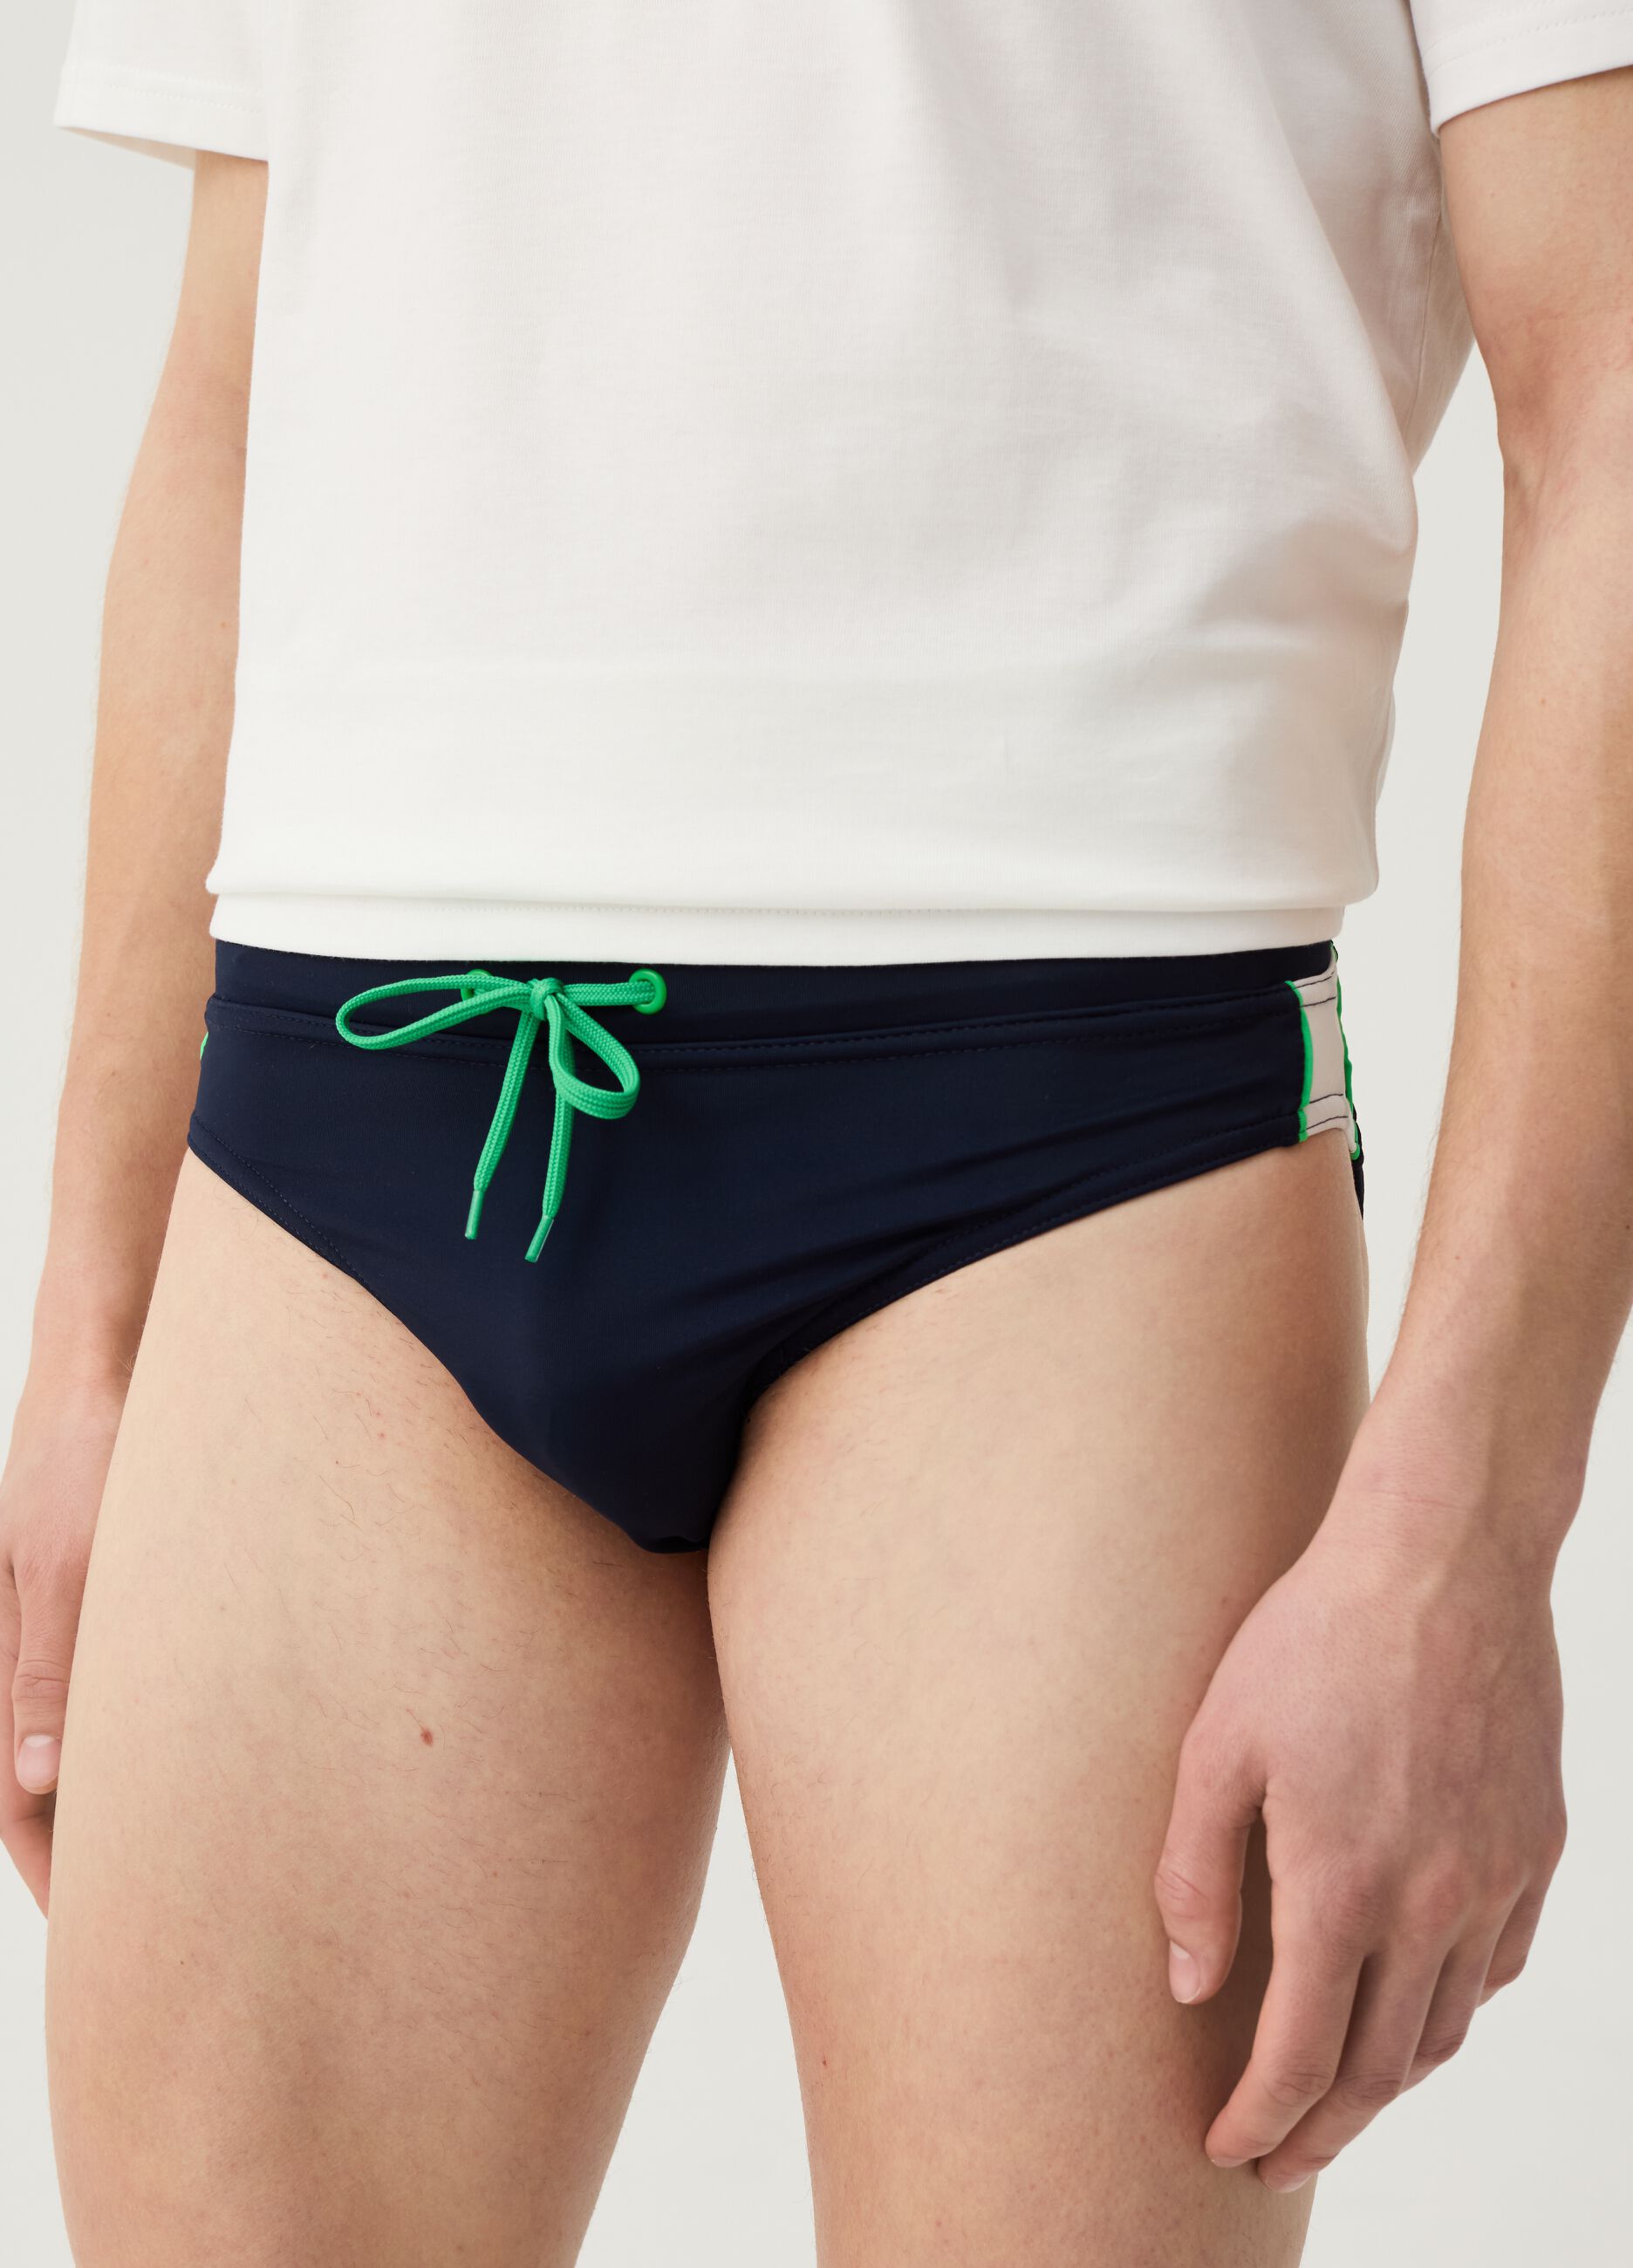 Swim briefs with side bands